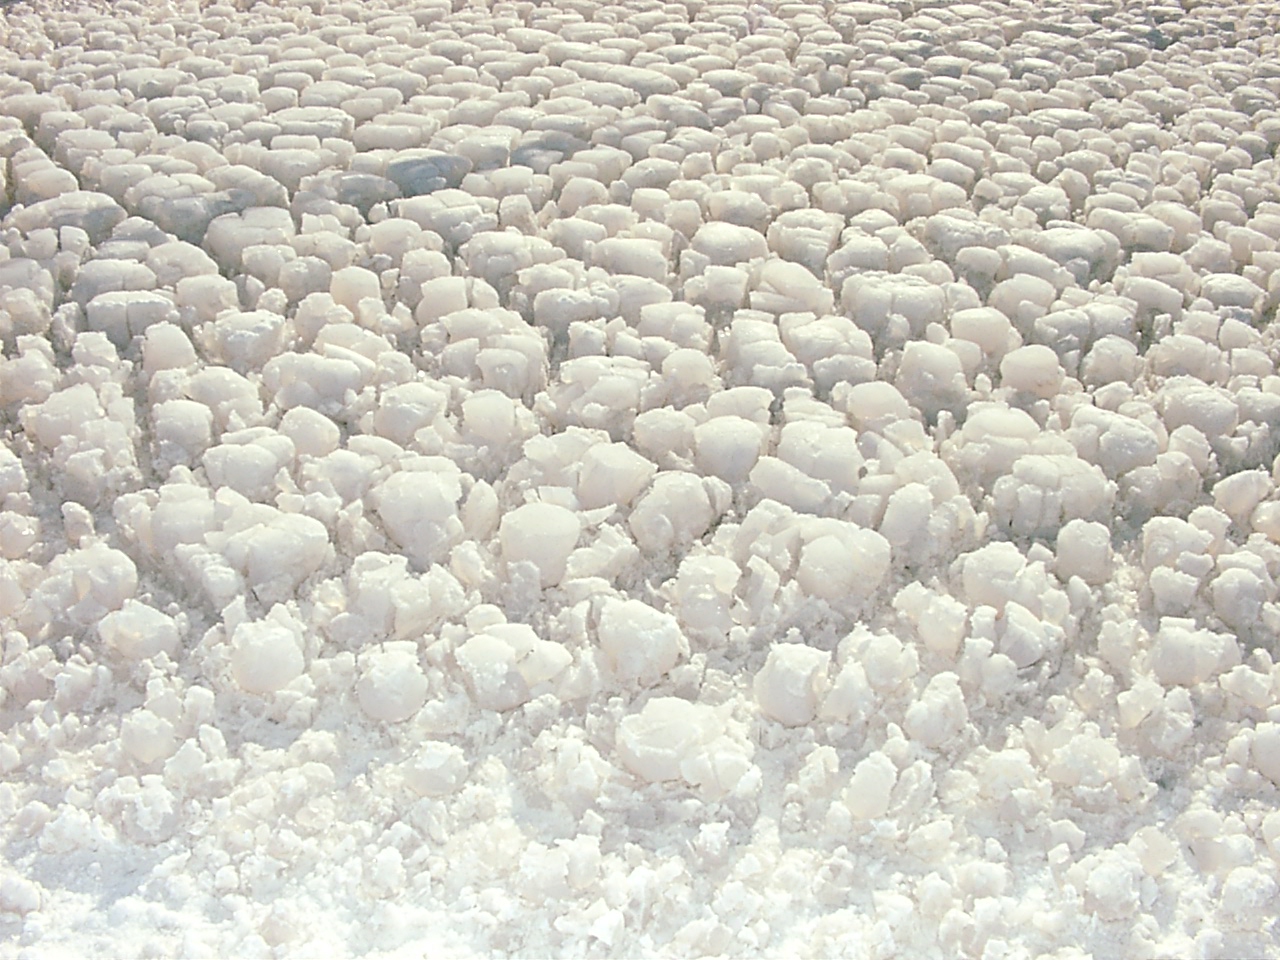 Fully Dehydrated Crystals